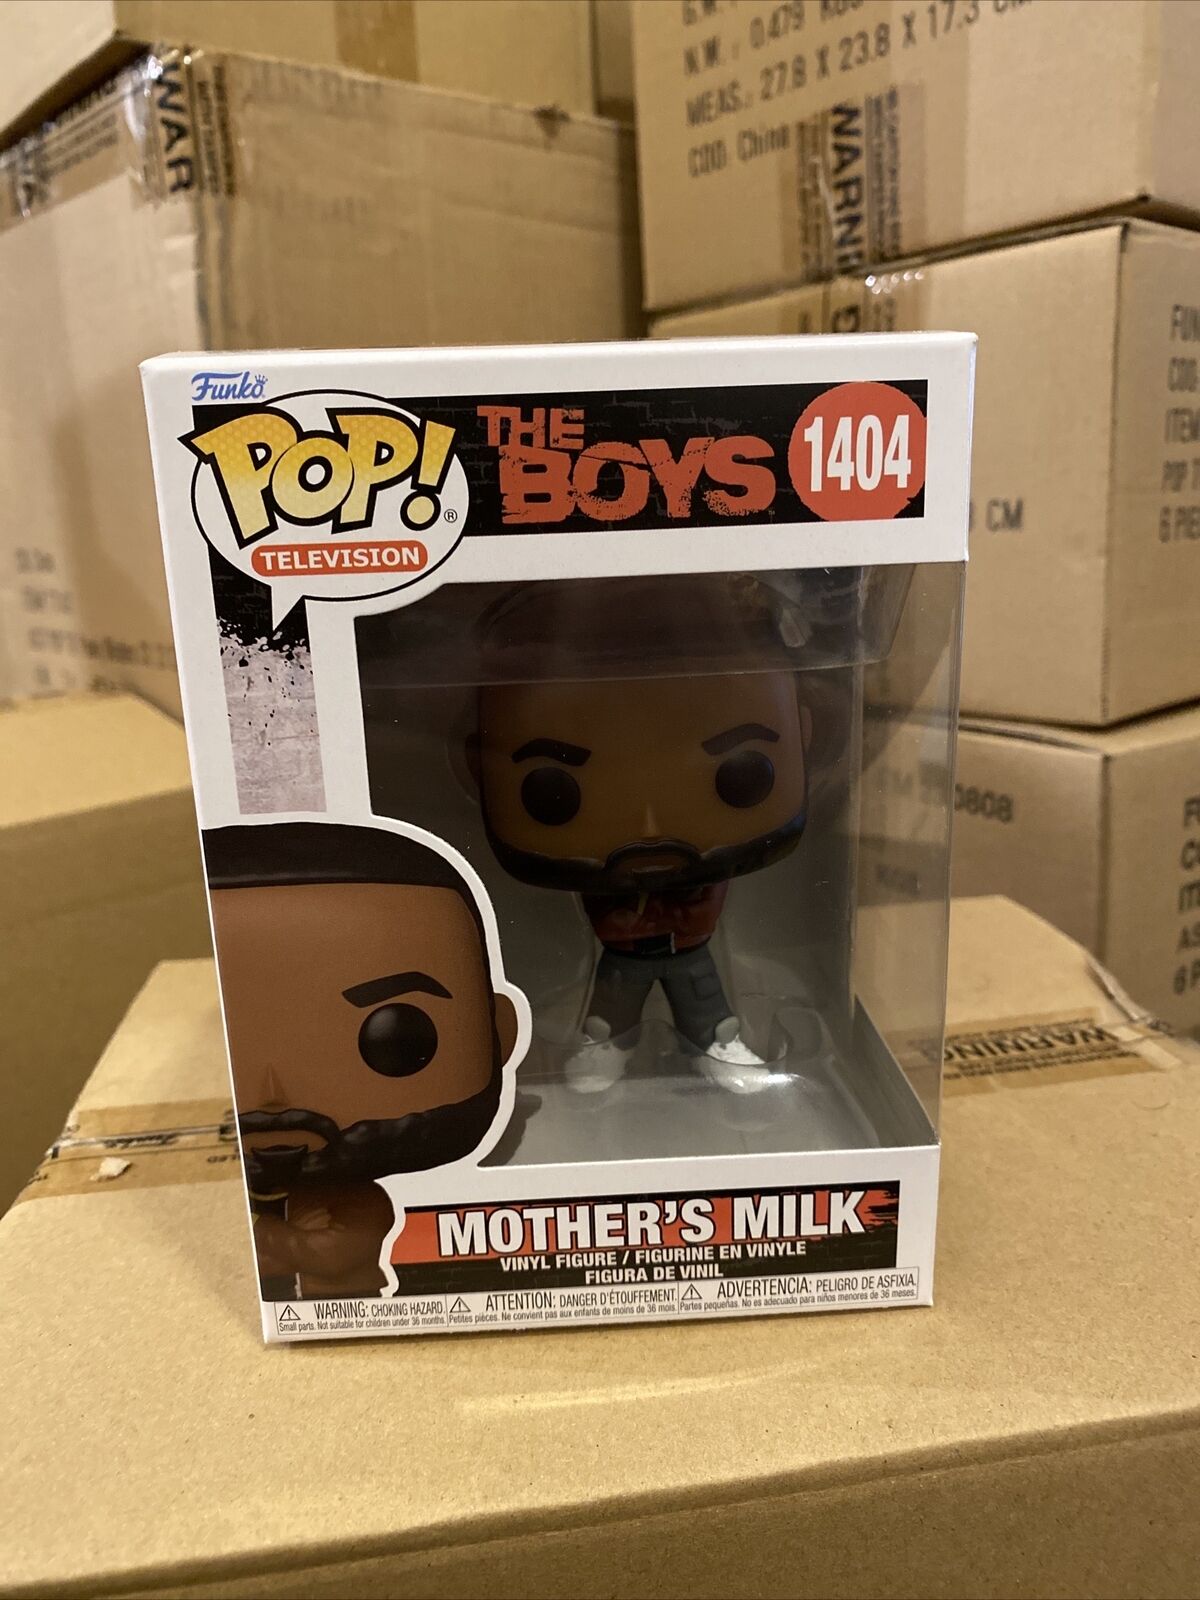 Funko POP Television: The Boys - Mother's Milk #1404 In Stock Ships Now